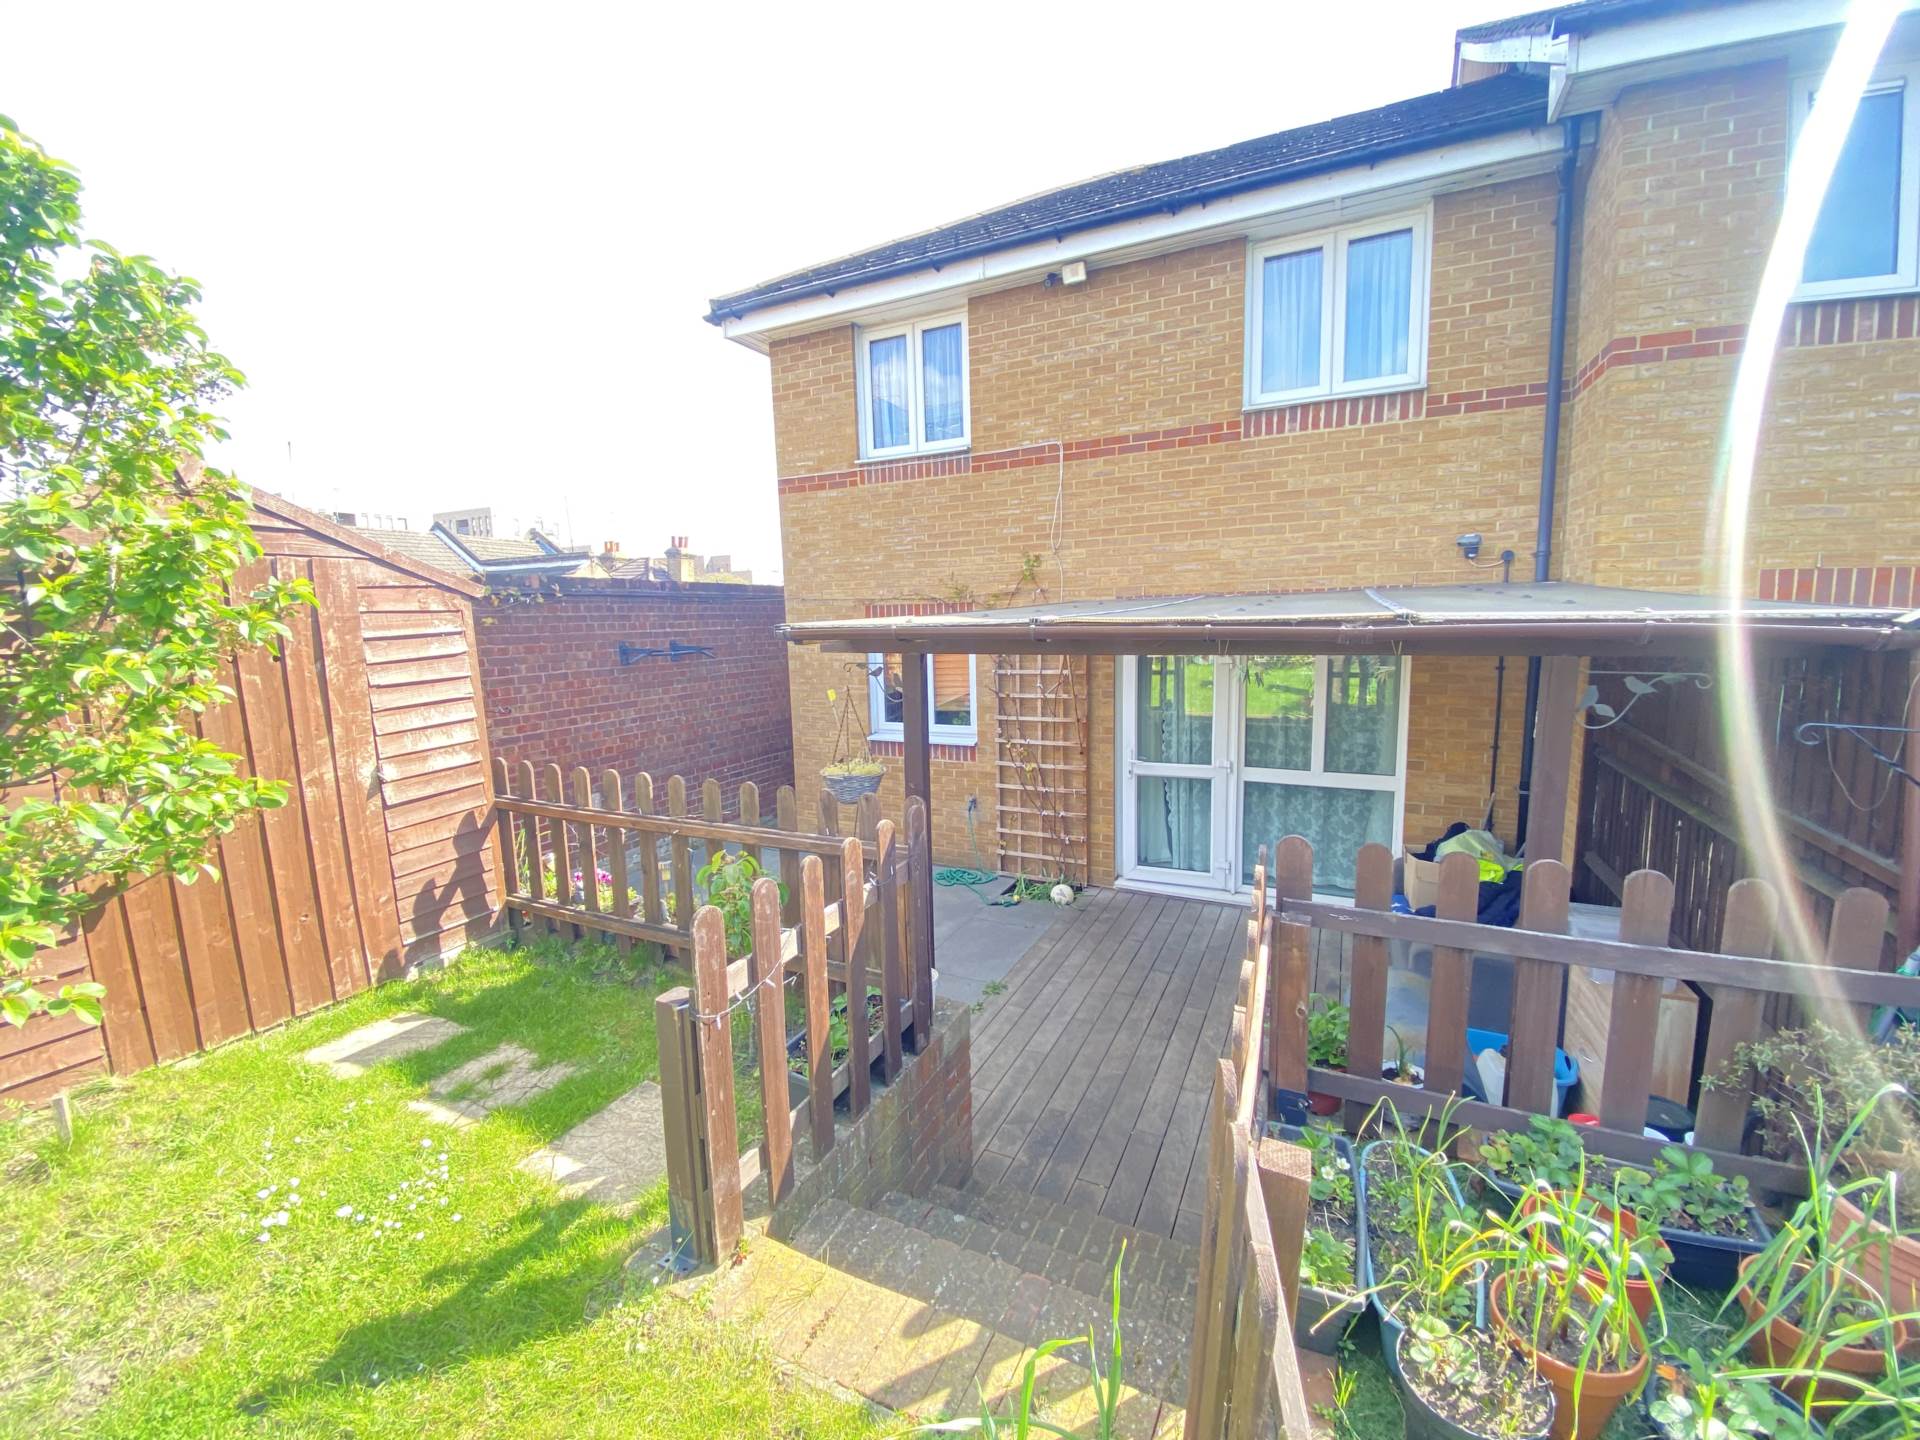 Maple Court, Erith, *  3D FLOORPAN & VIDEO AVAILABLE *, Image 14